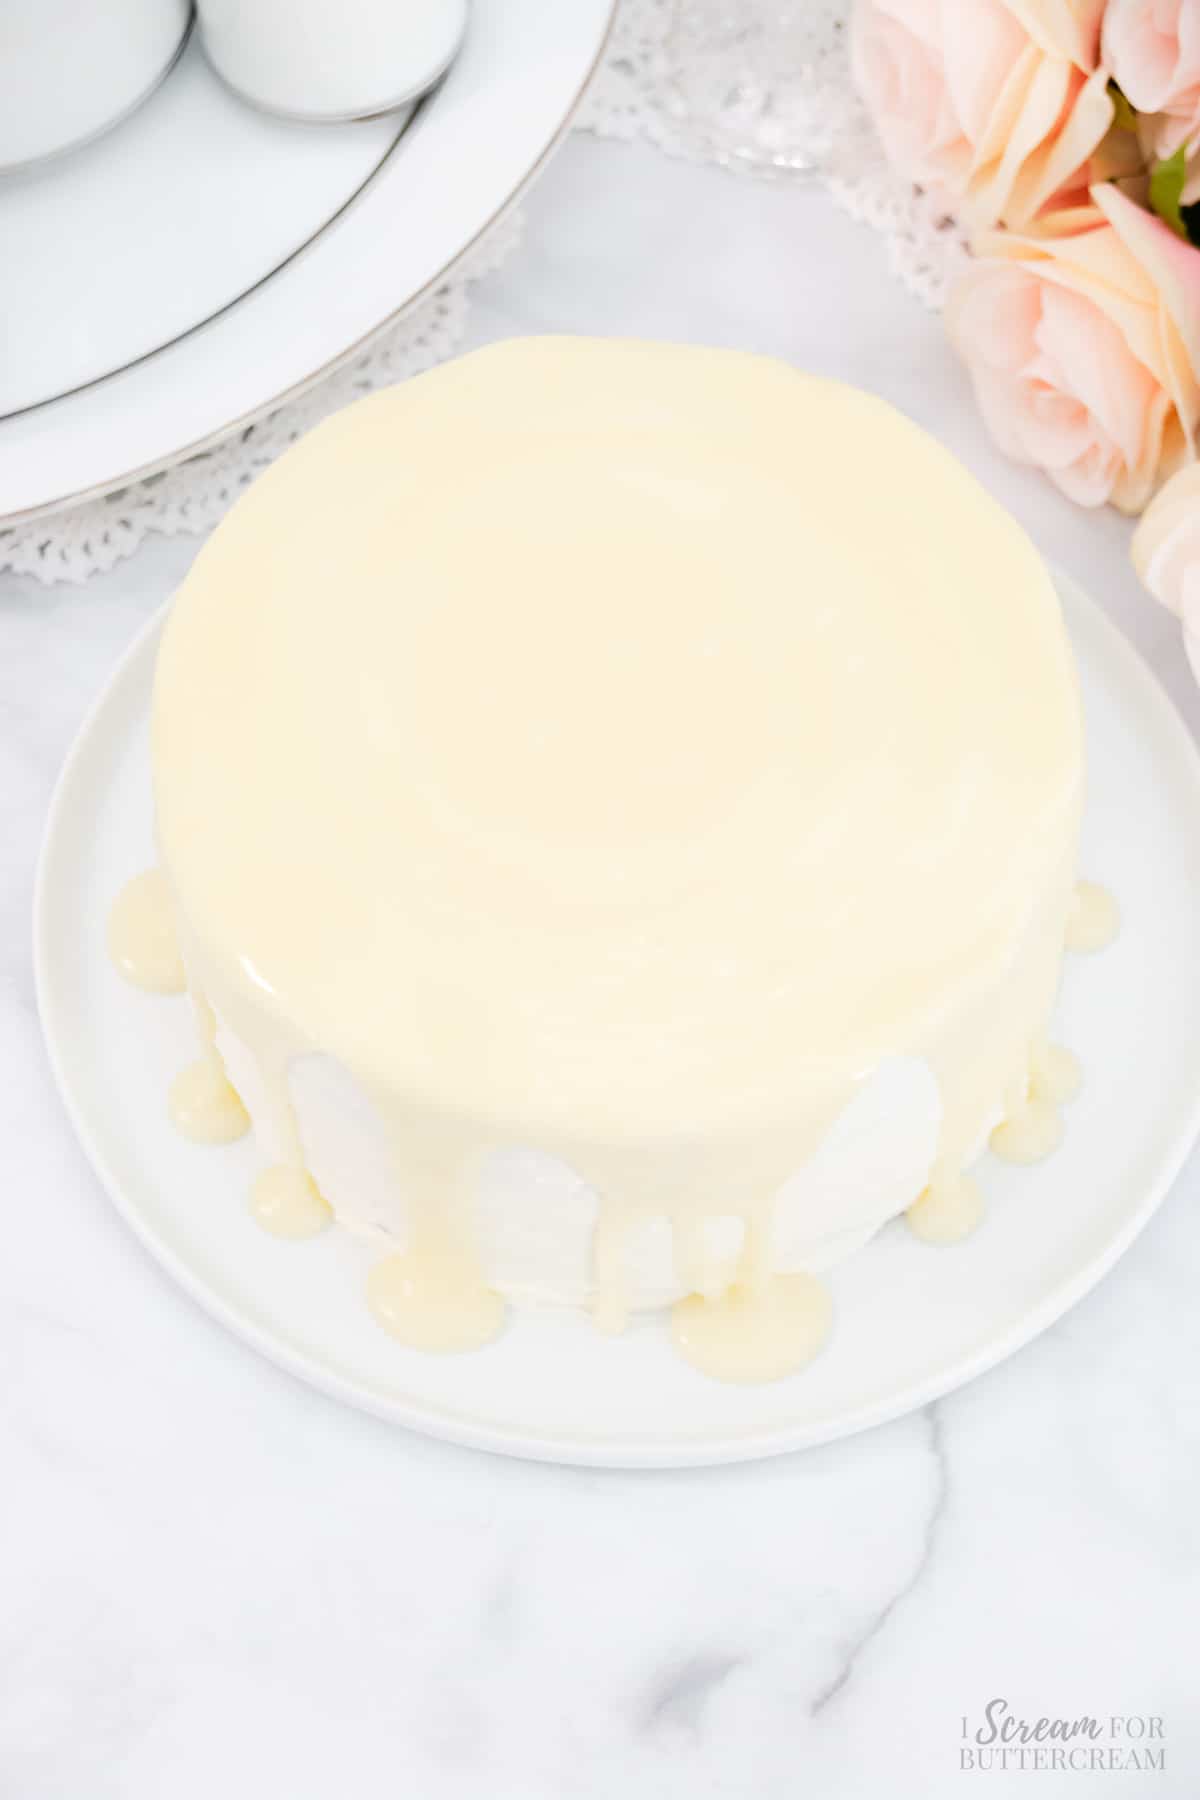 White chocolate ganache poured over the top of a frosted cake on a white platter.